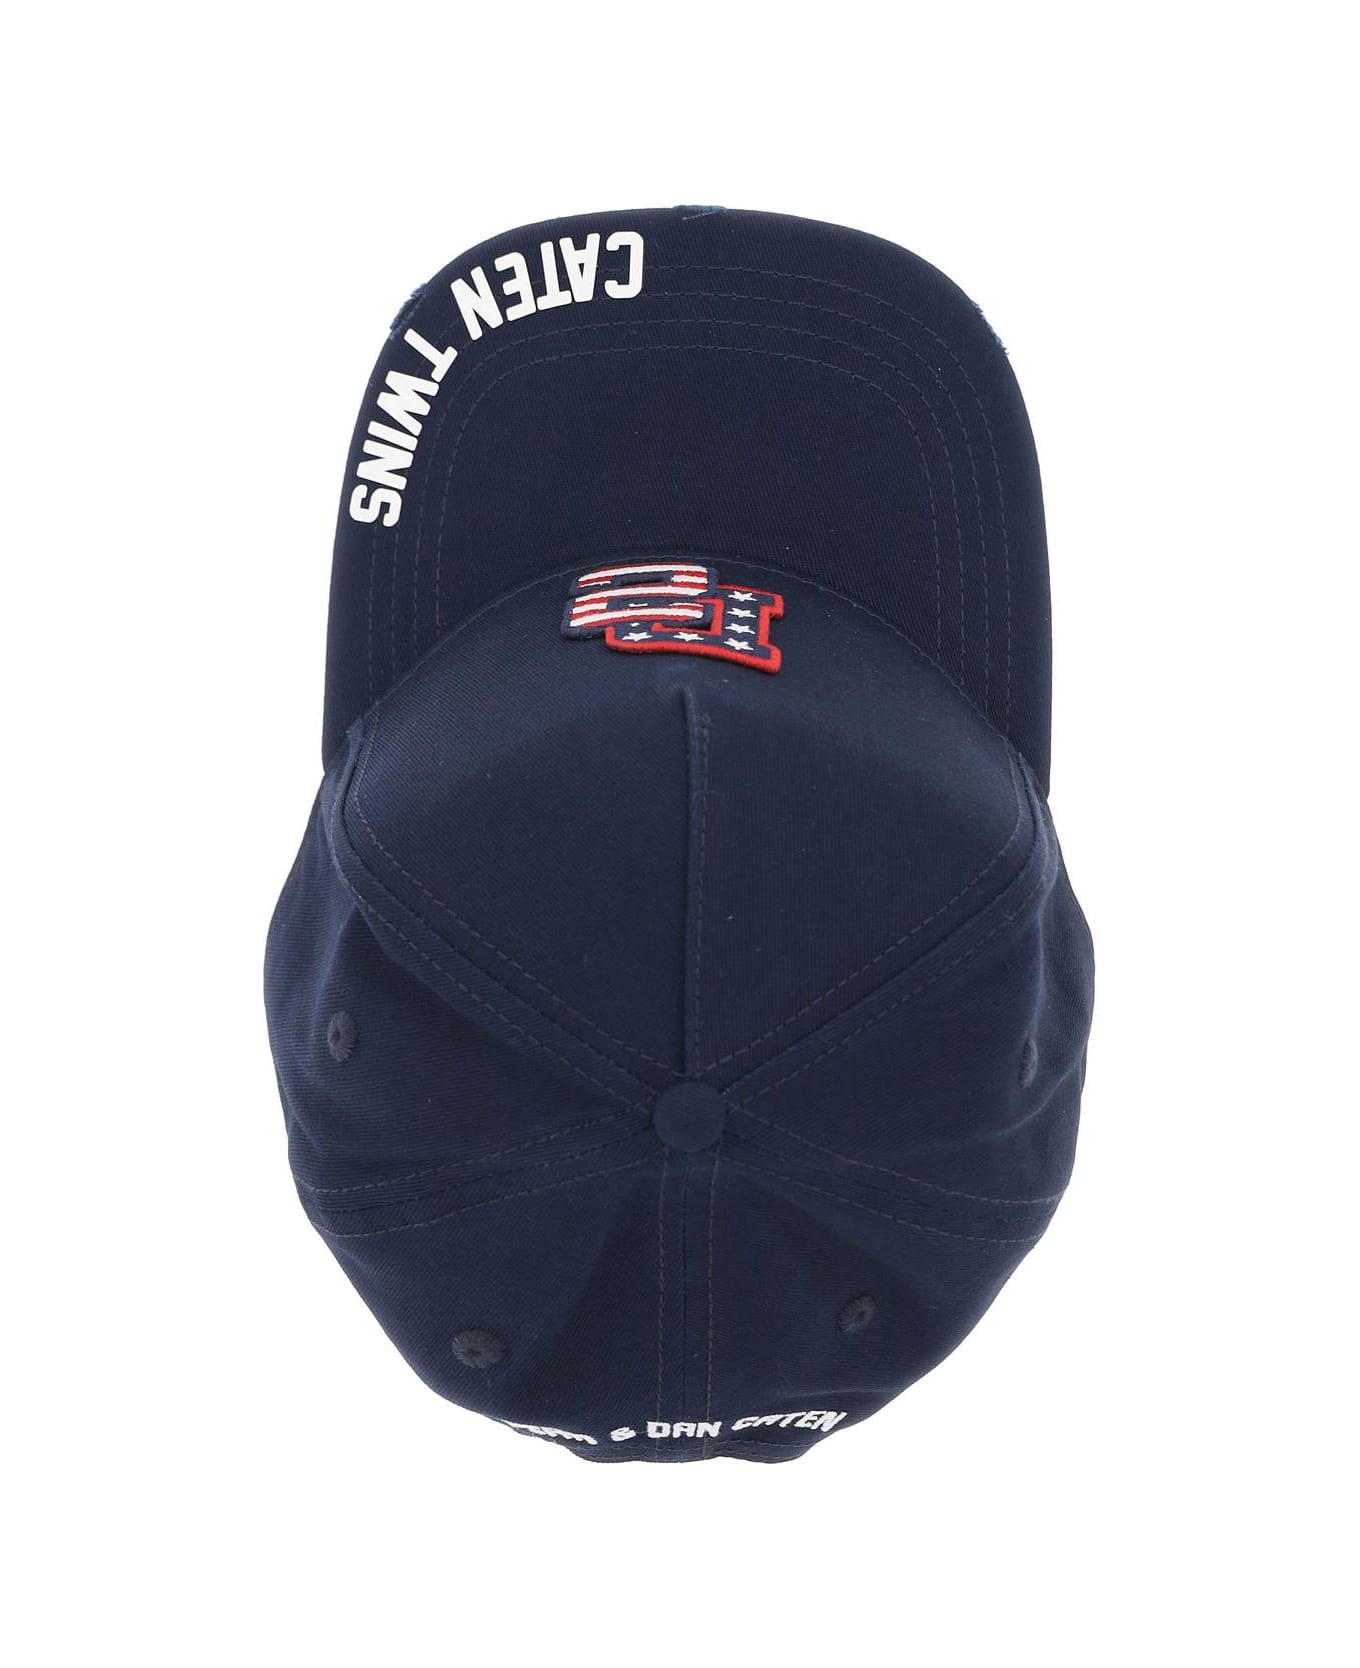 Dsquared2 Baseball Cap With Embroidered Patch - NAVY (Blue) 帽子